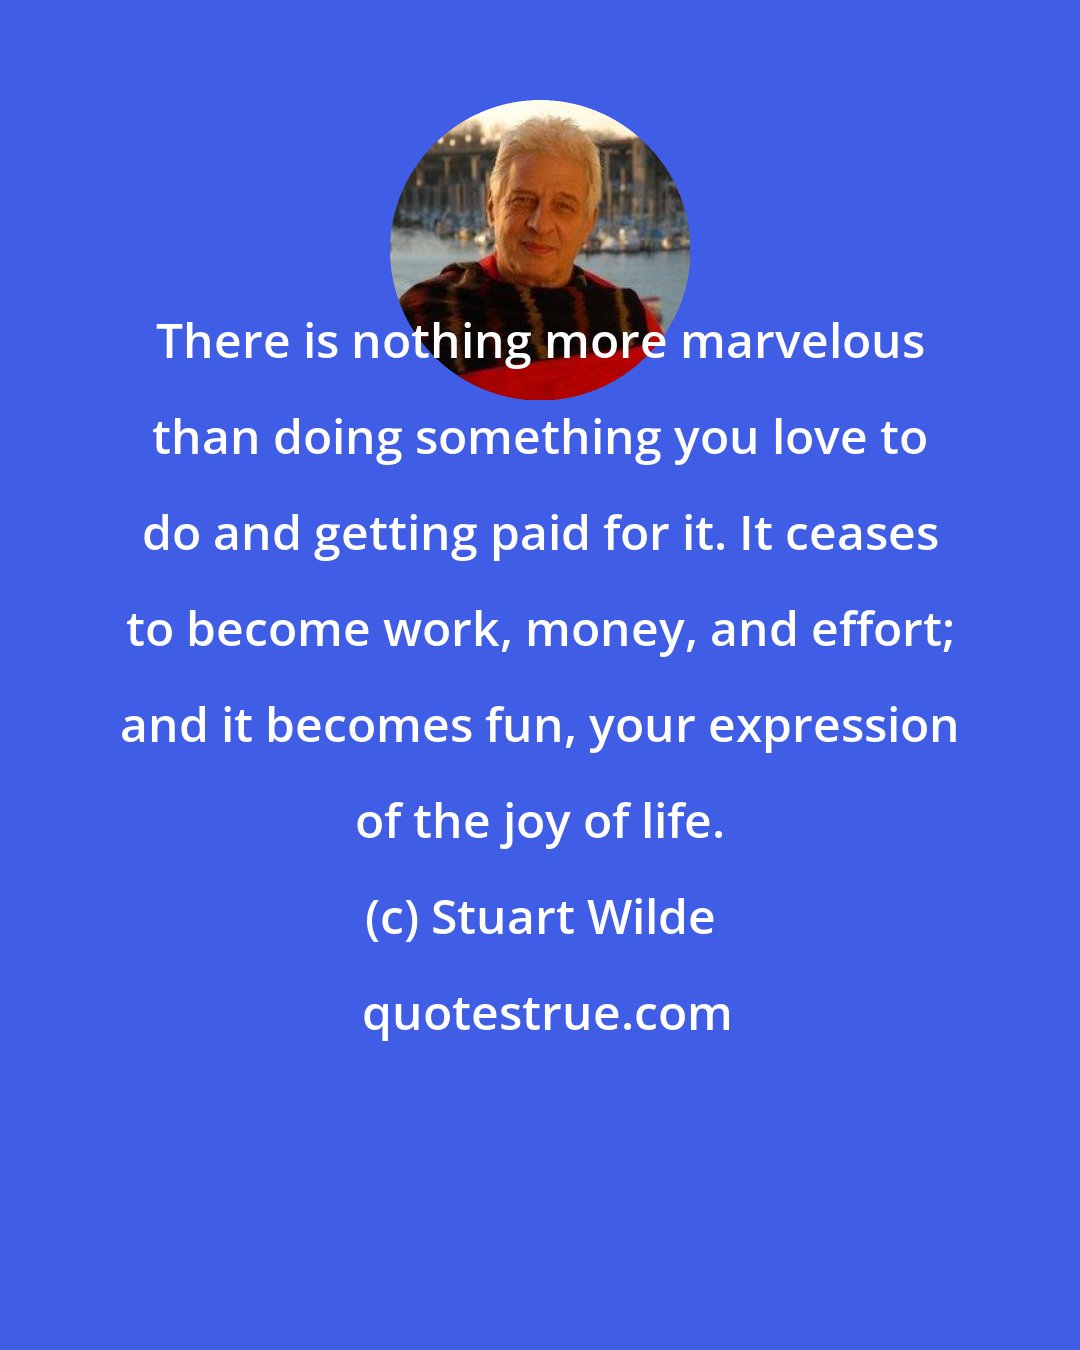 Stuart Wilde: There is nothing more marvelous than doing something you love to do and getting paid for it. It ceases to become work, money, and effort; and it becomes fun, your expression of the joy of life.